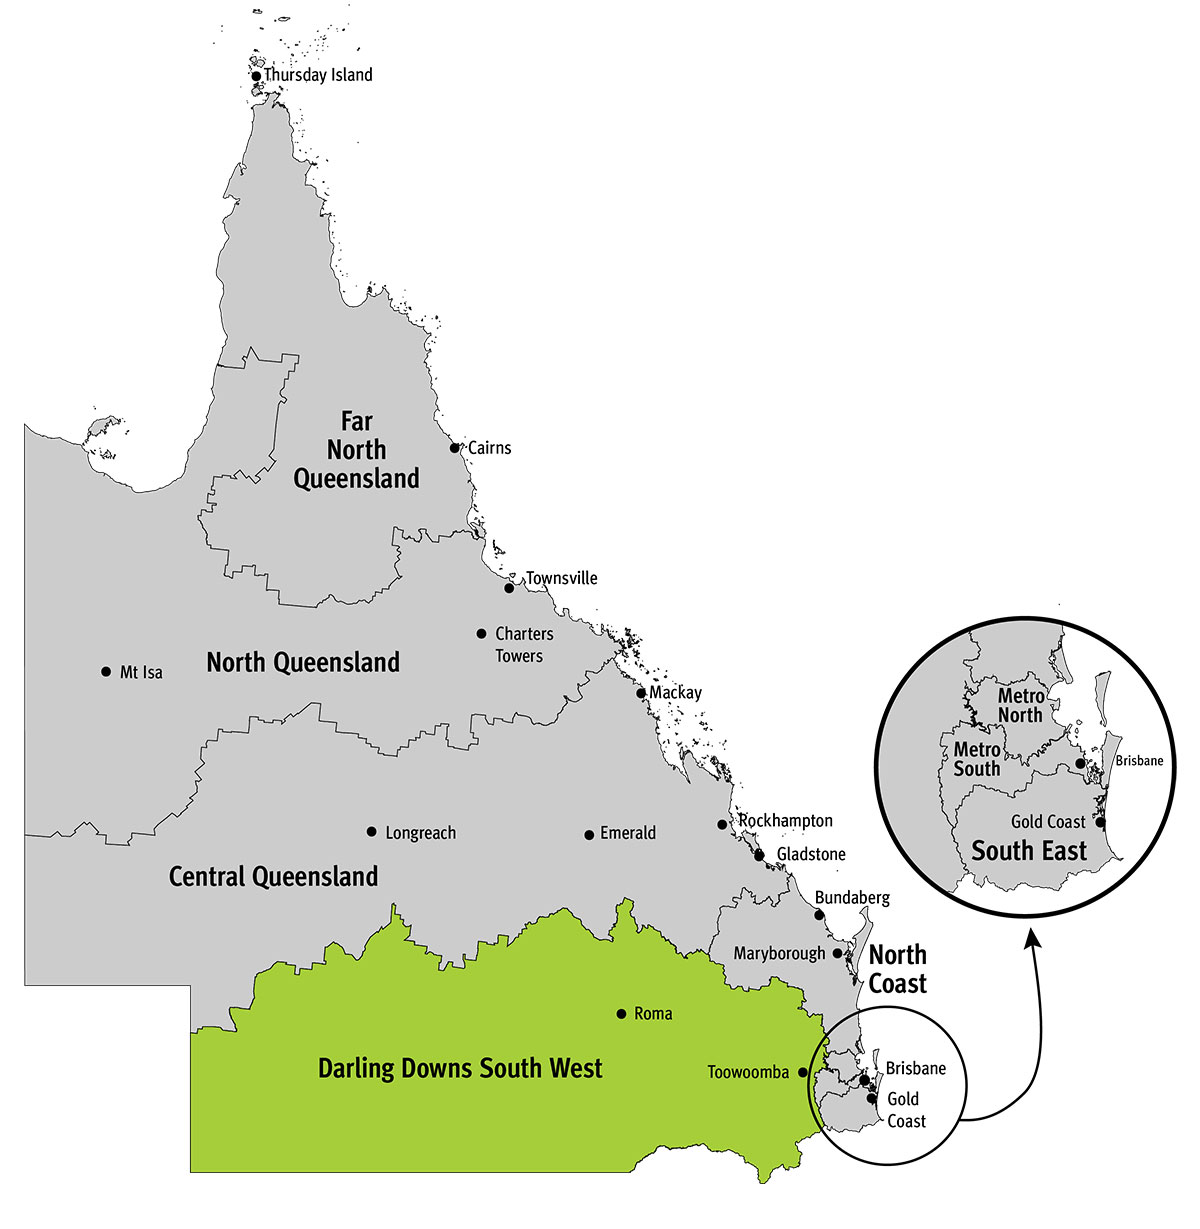 Queensland map with Darling Downs South West region highlighted. Roma and Toowoomba are included in this region.